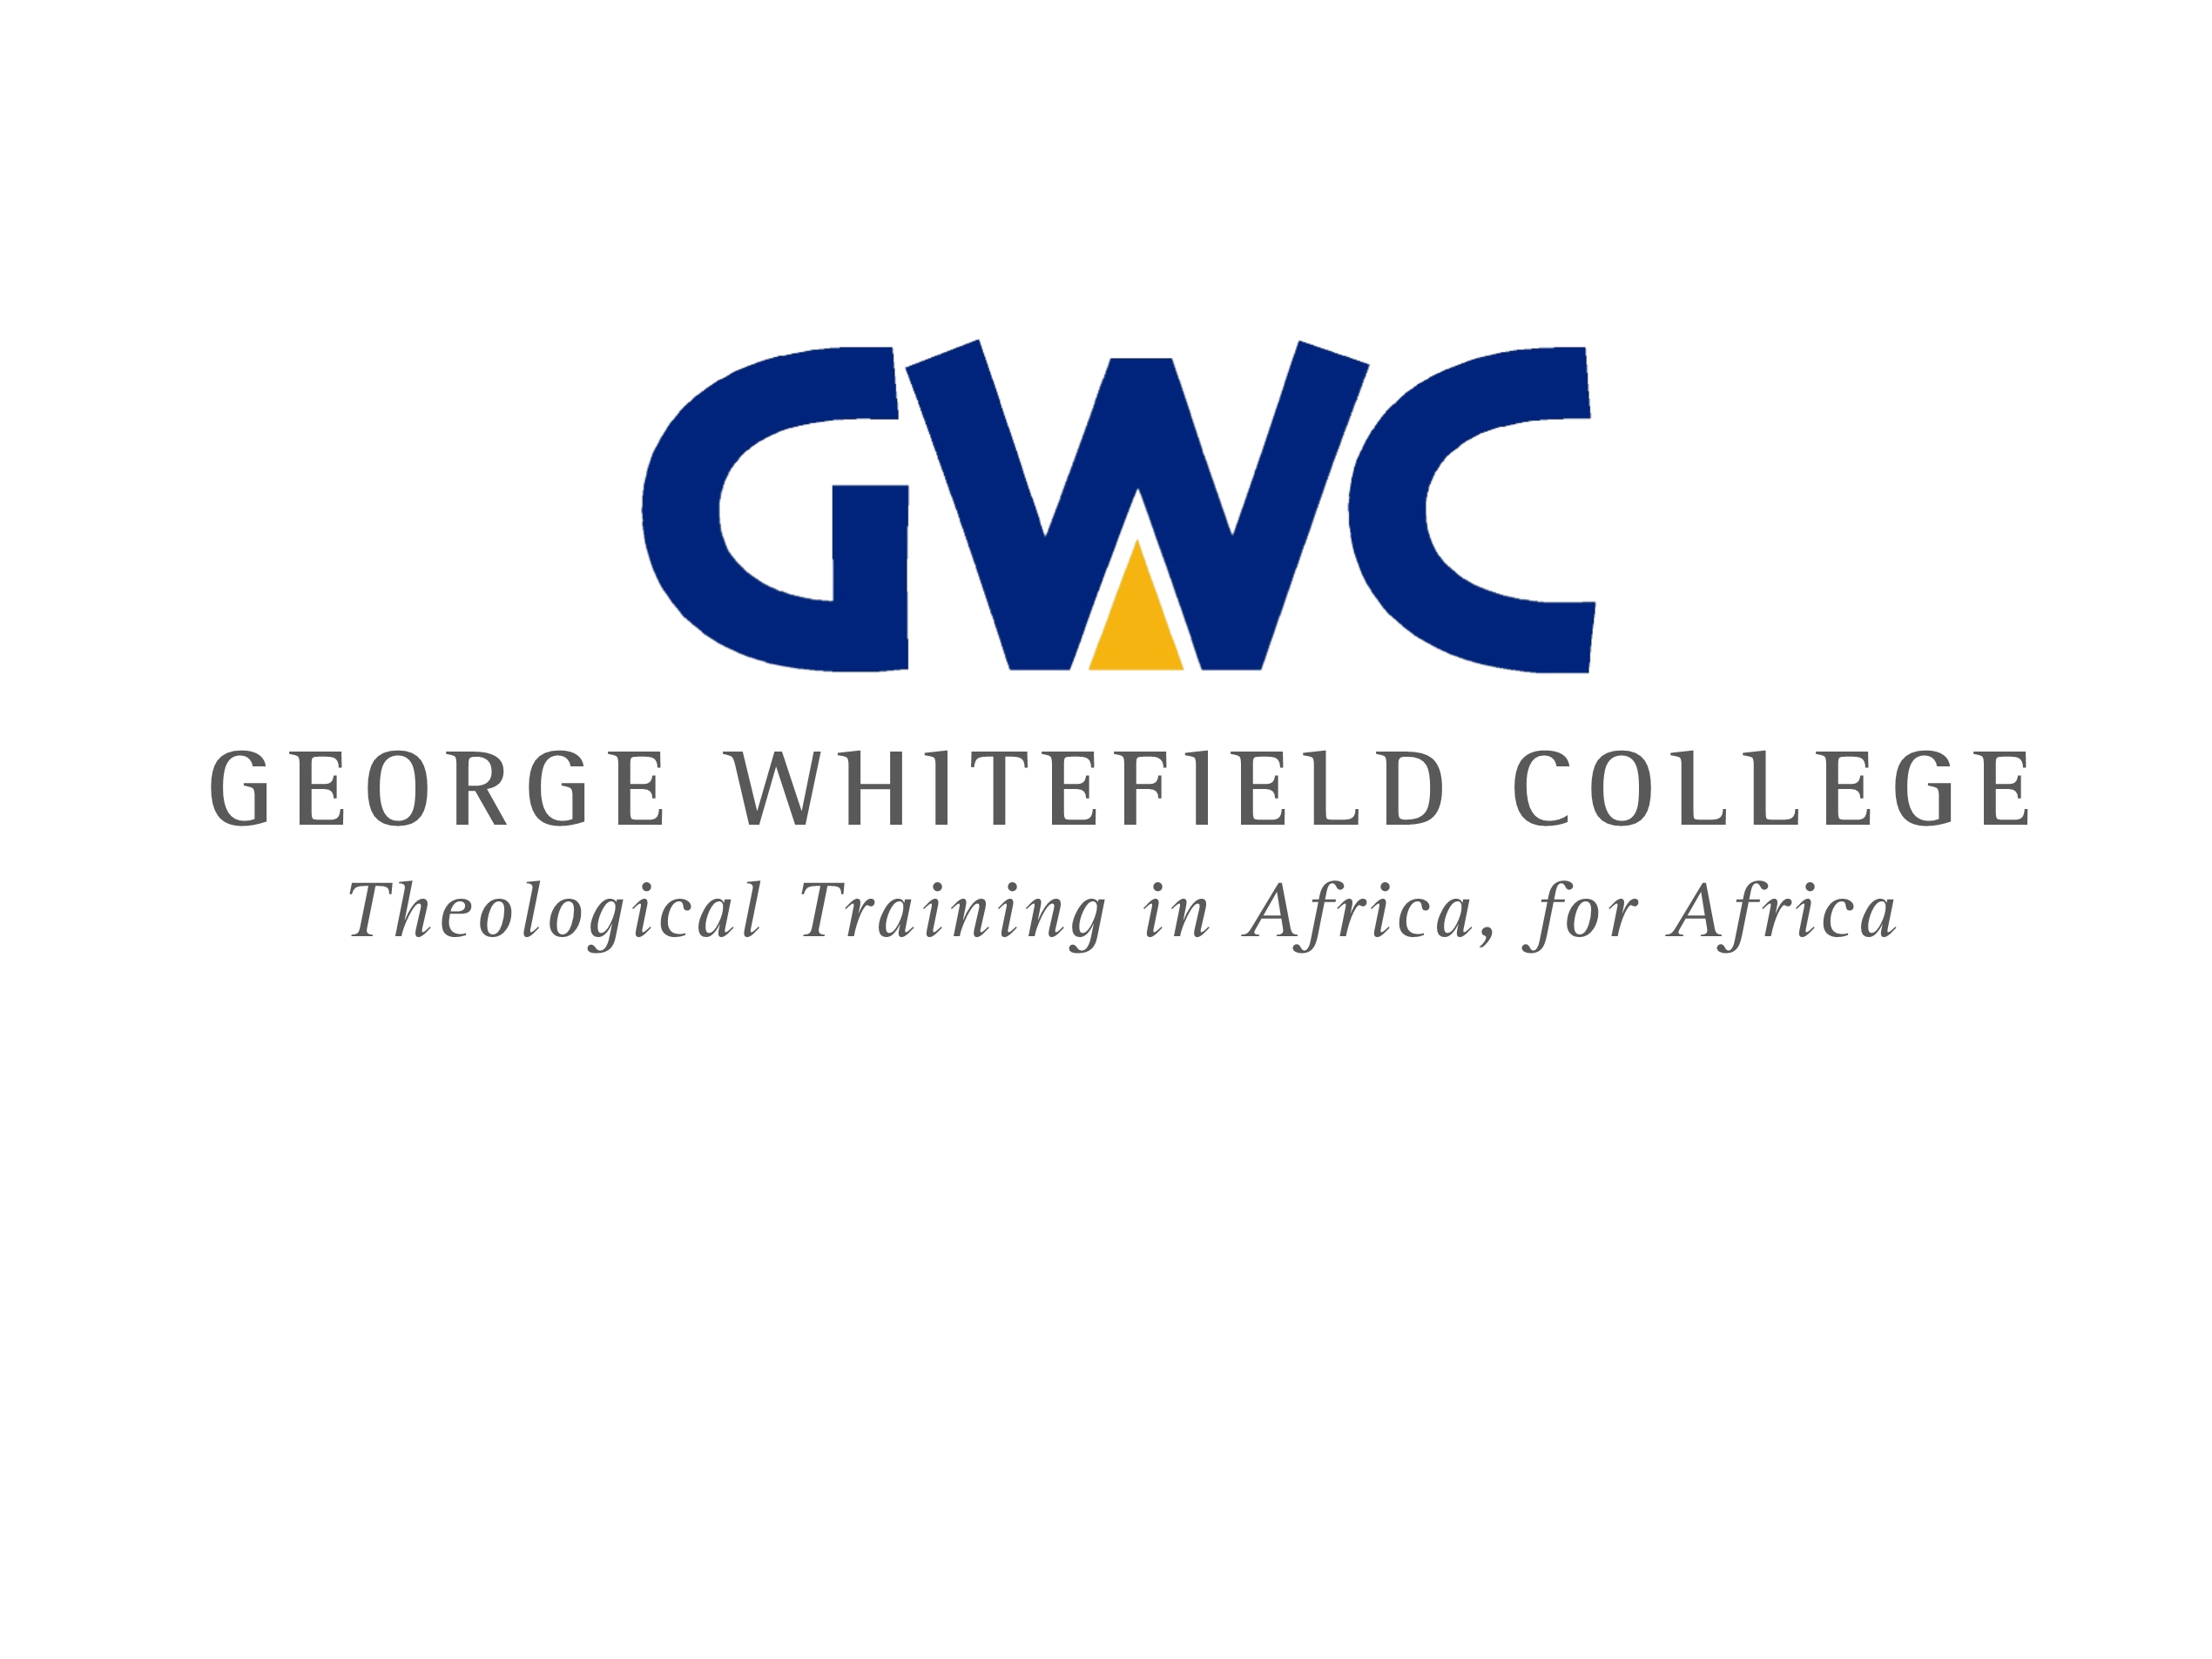 George Whitefield College logo